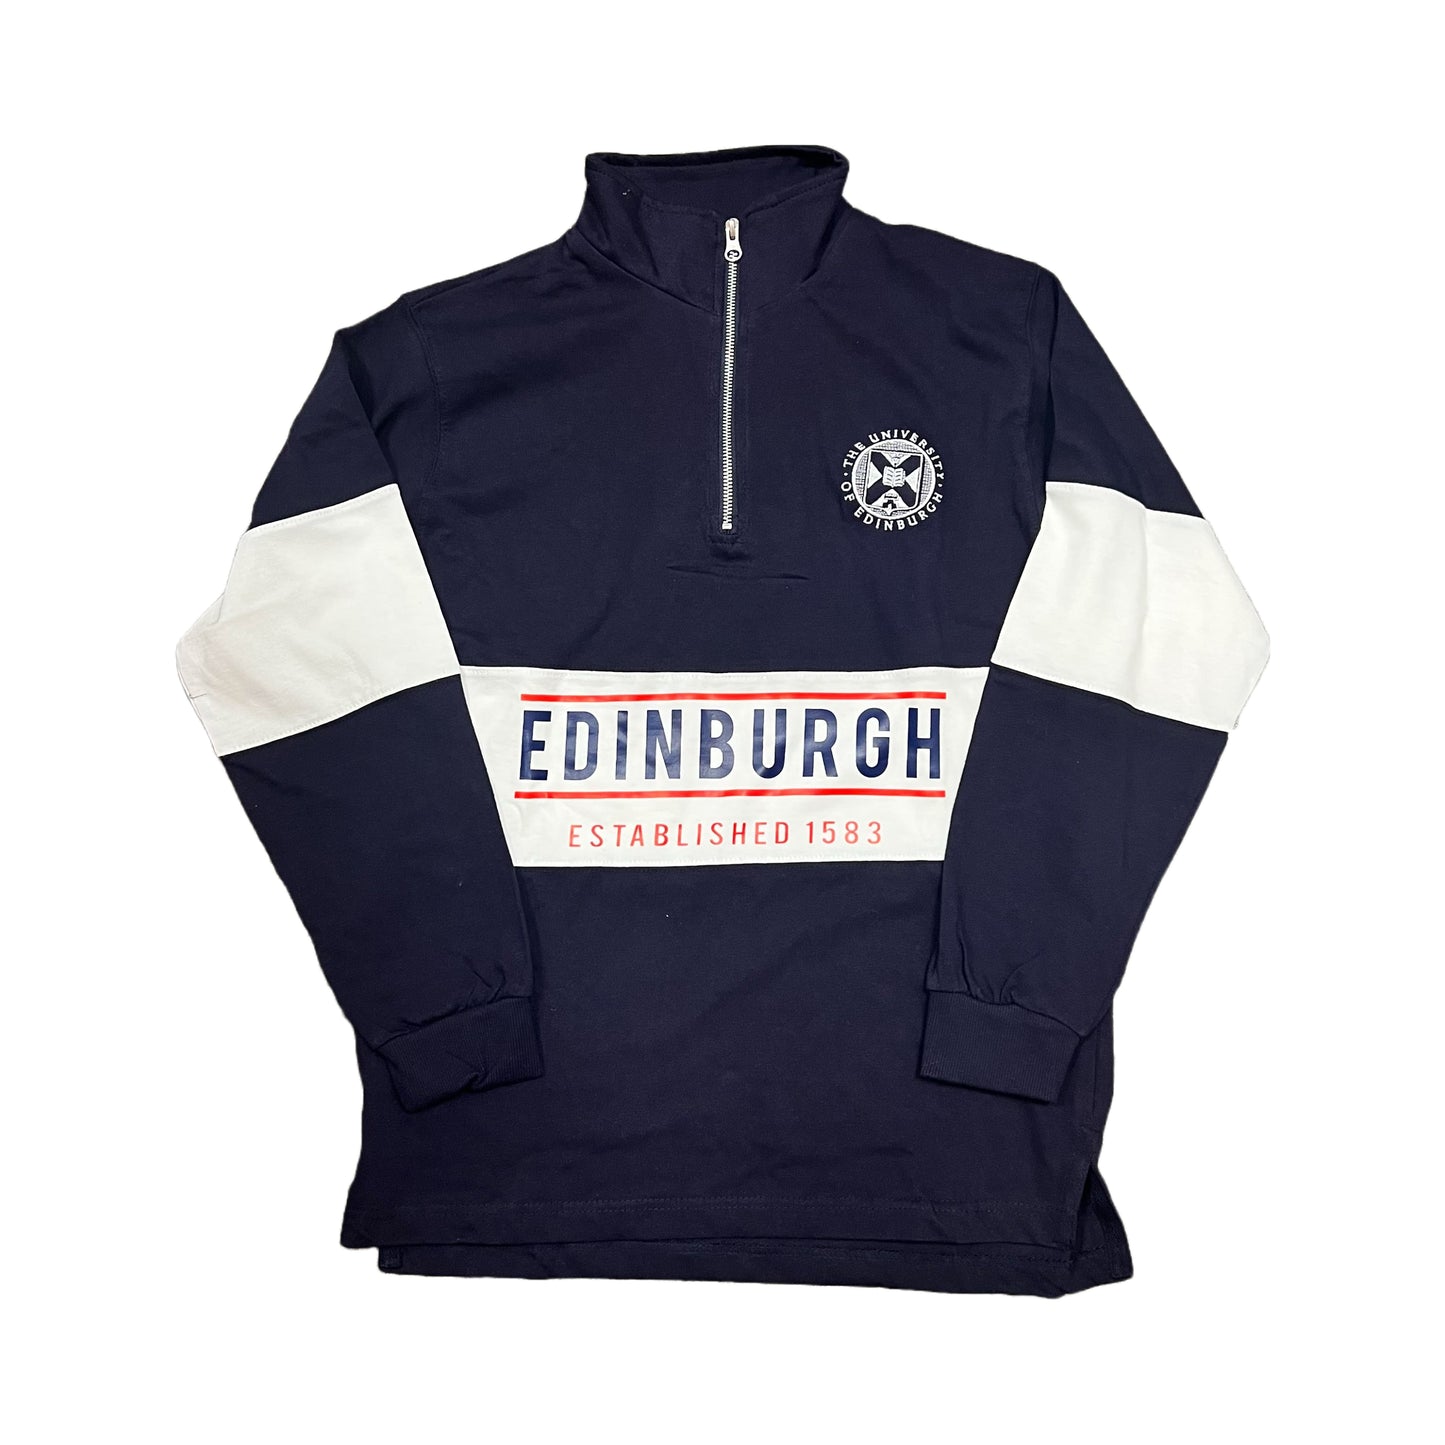 quarter zip navy sweatshirt with white panel around the middle, 'Edinburgh established 1583' print in navy and red and the university crest embroidered in white